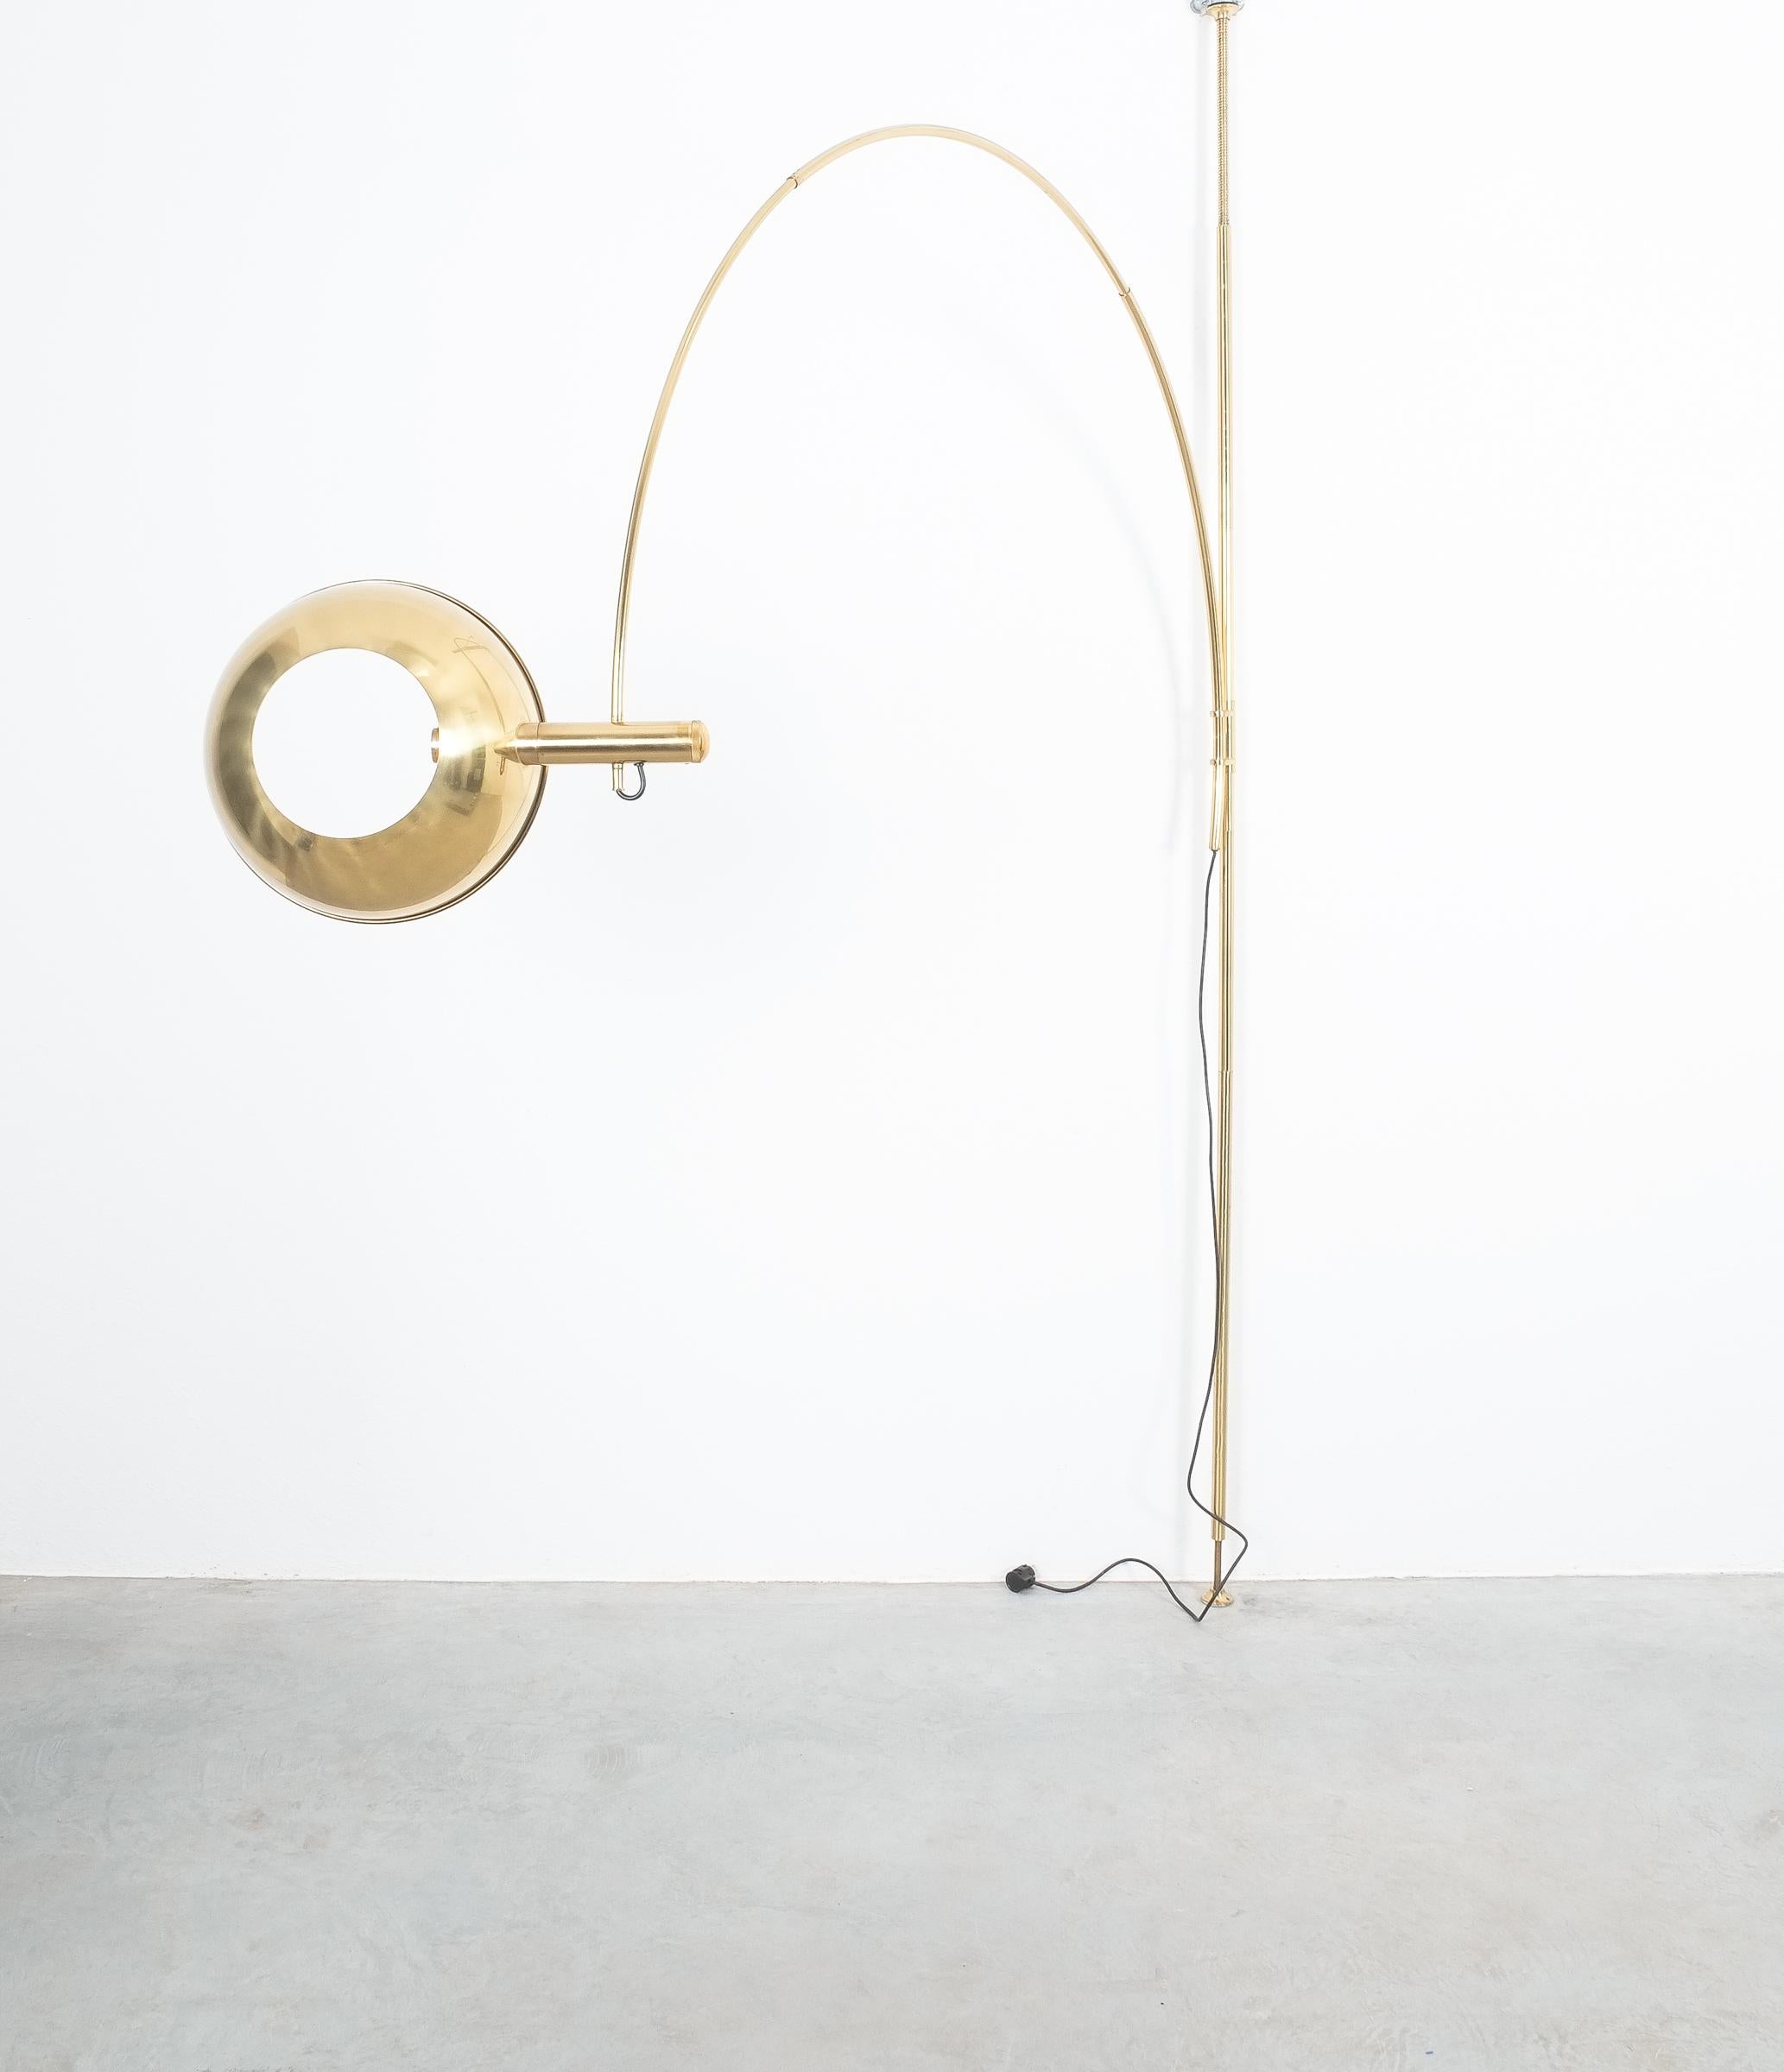 Polished Brass Floor Lamp with Adjustable Arc by Florian Schulz, 1970